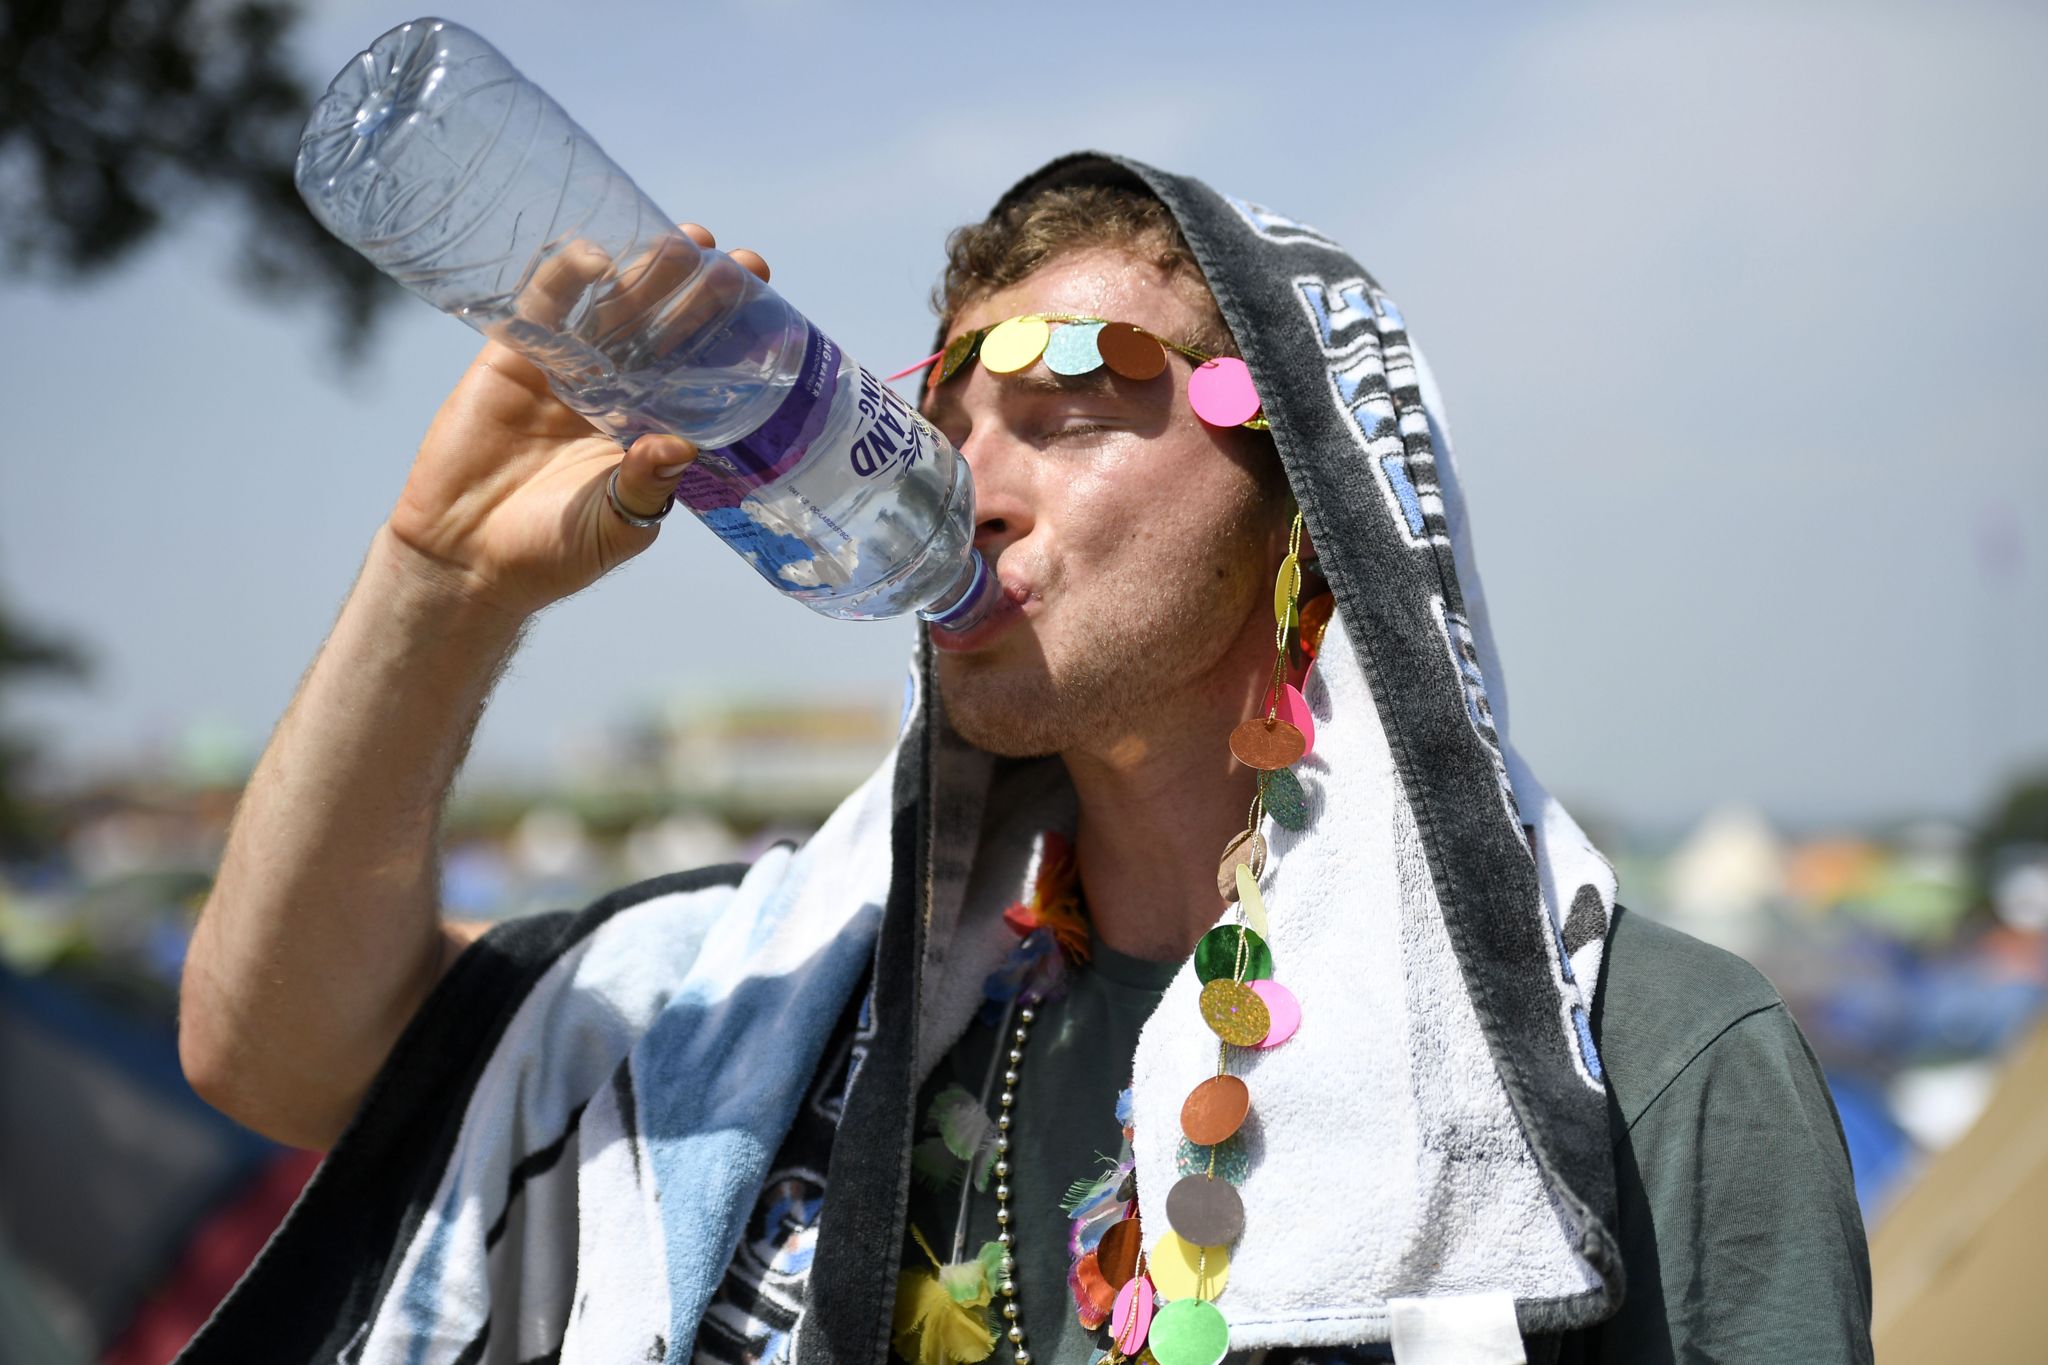 A festival-goer drinks water in the heat at Glastonbury